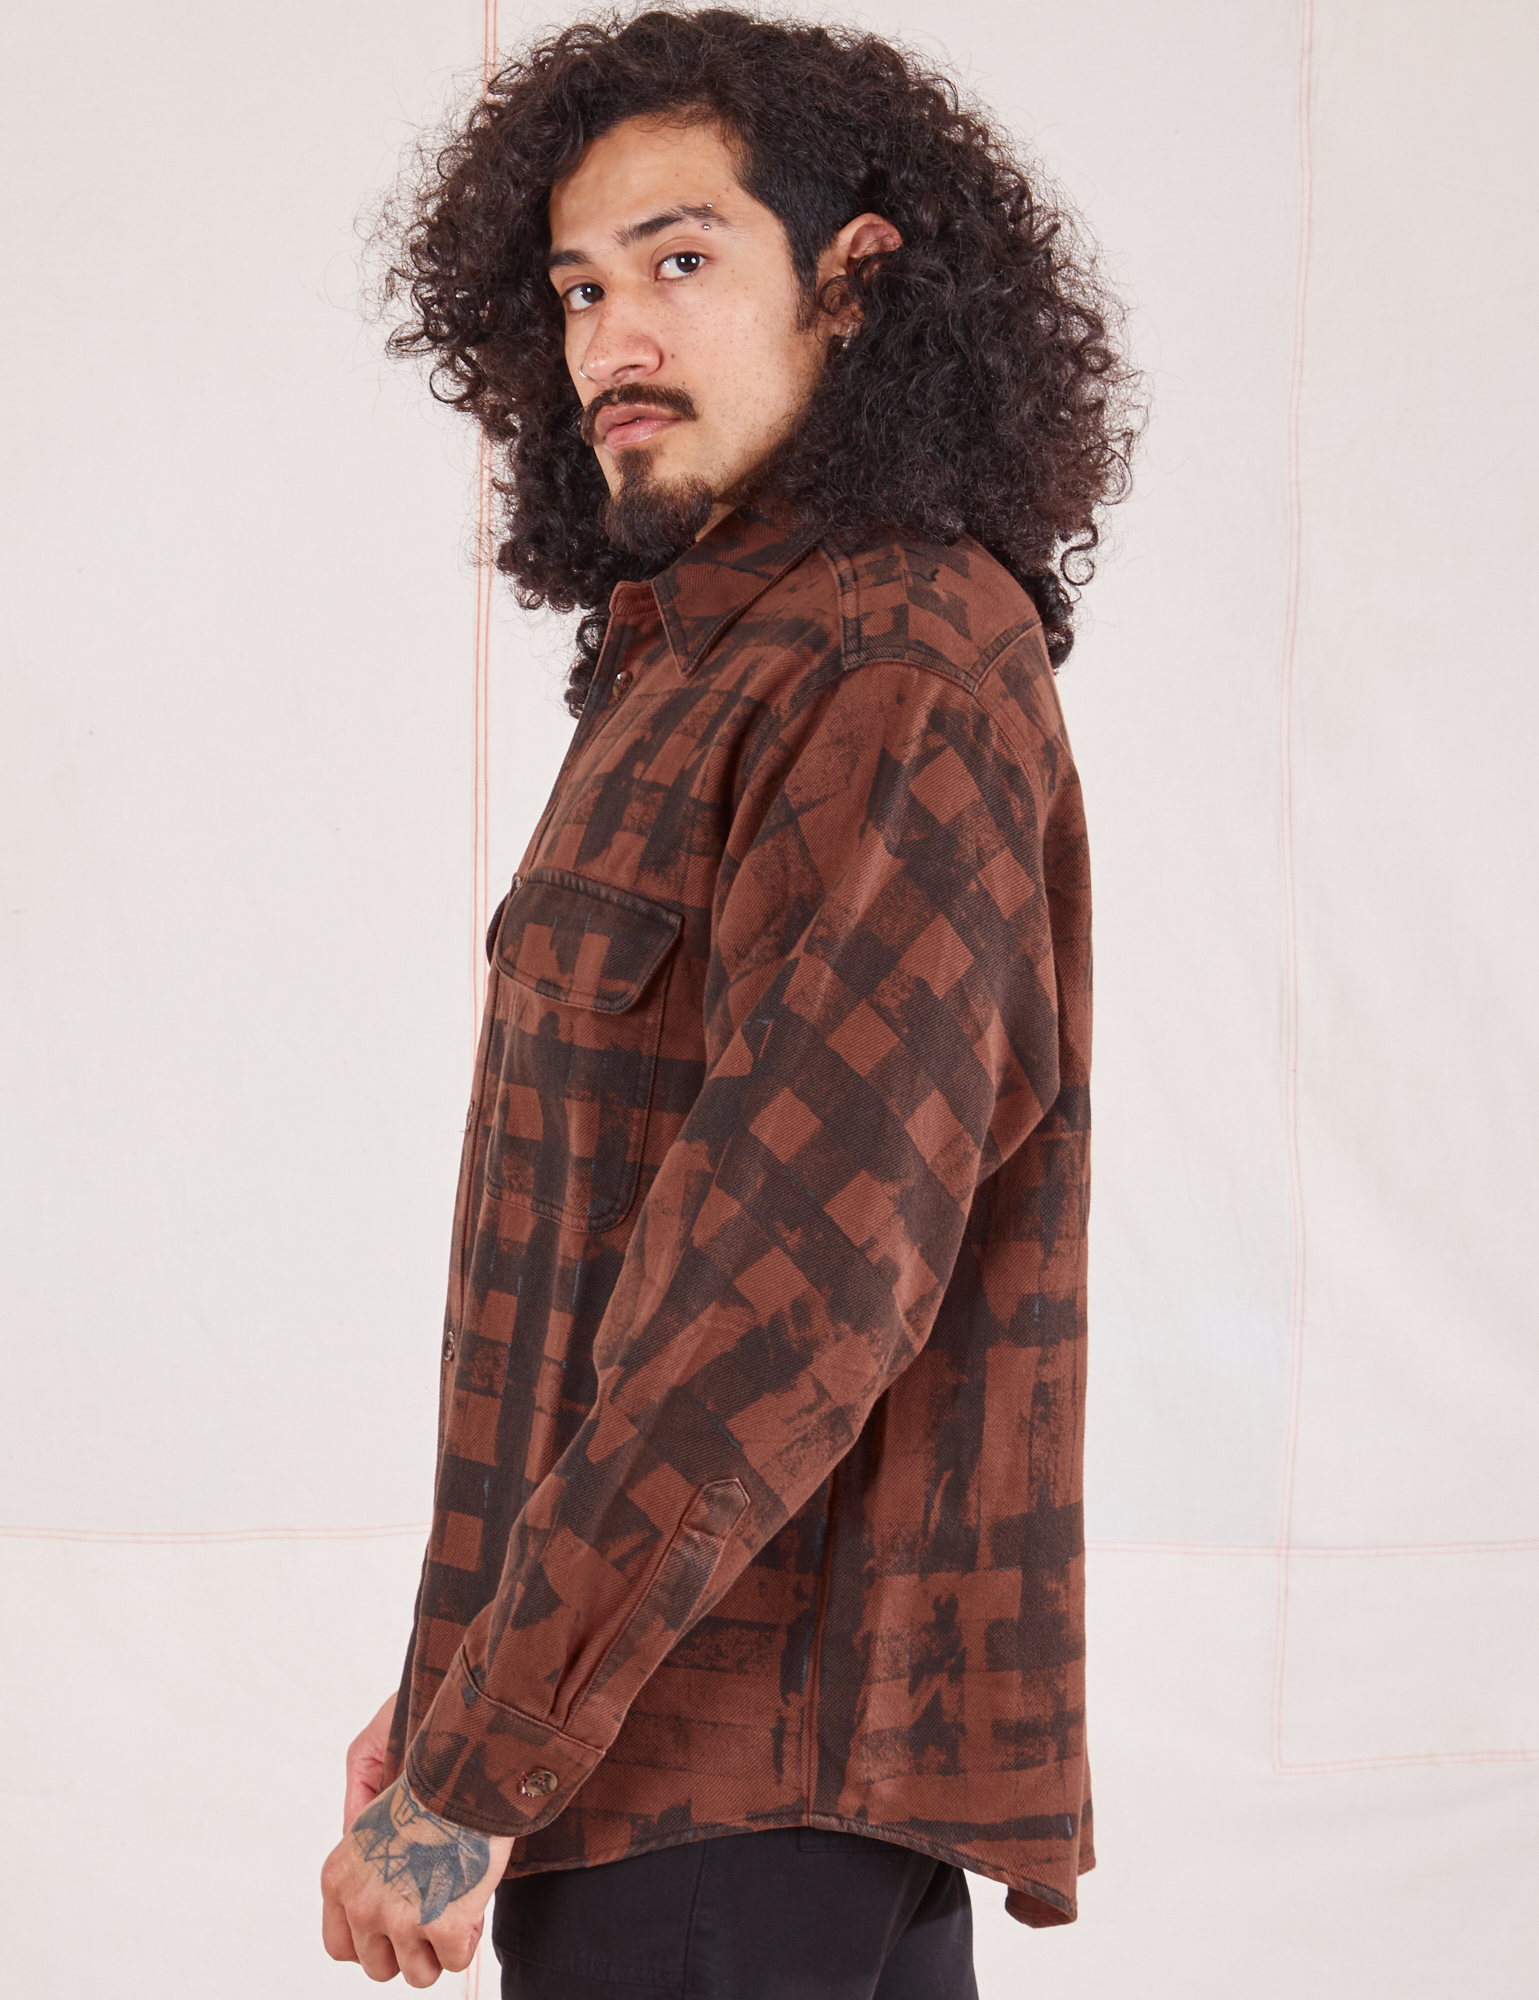 Plaid Flannel Overshirt in Fudgesicle Brown side view on Jesse